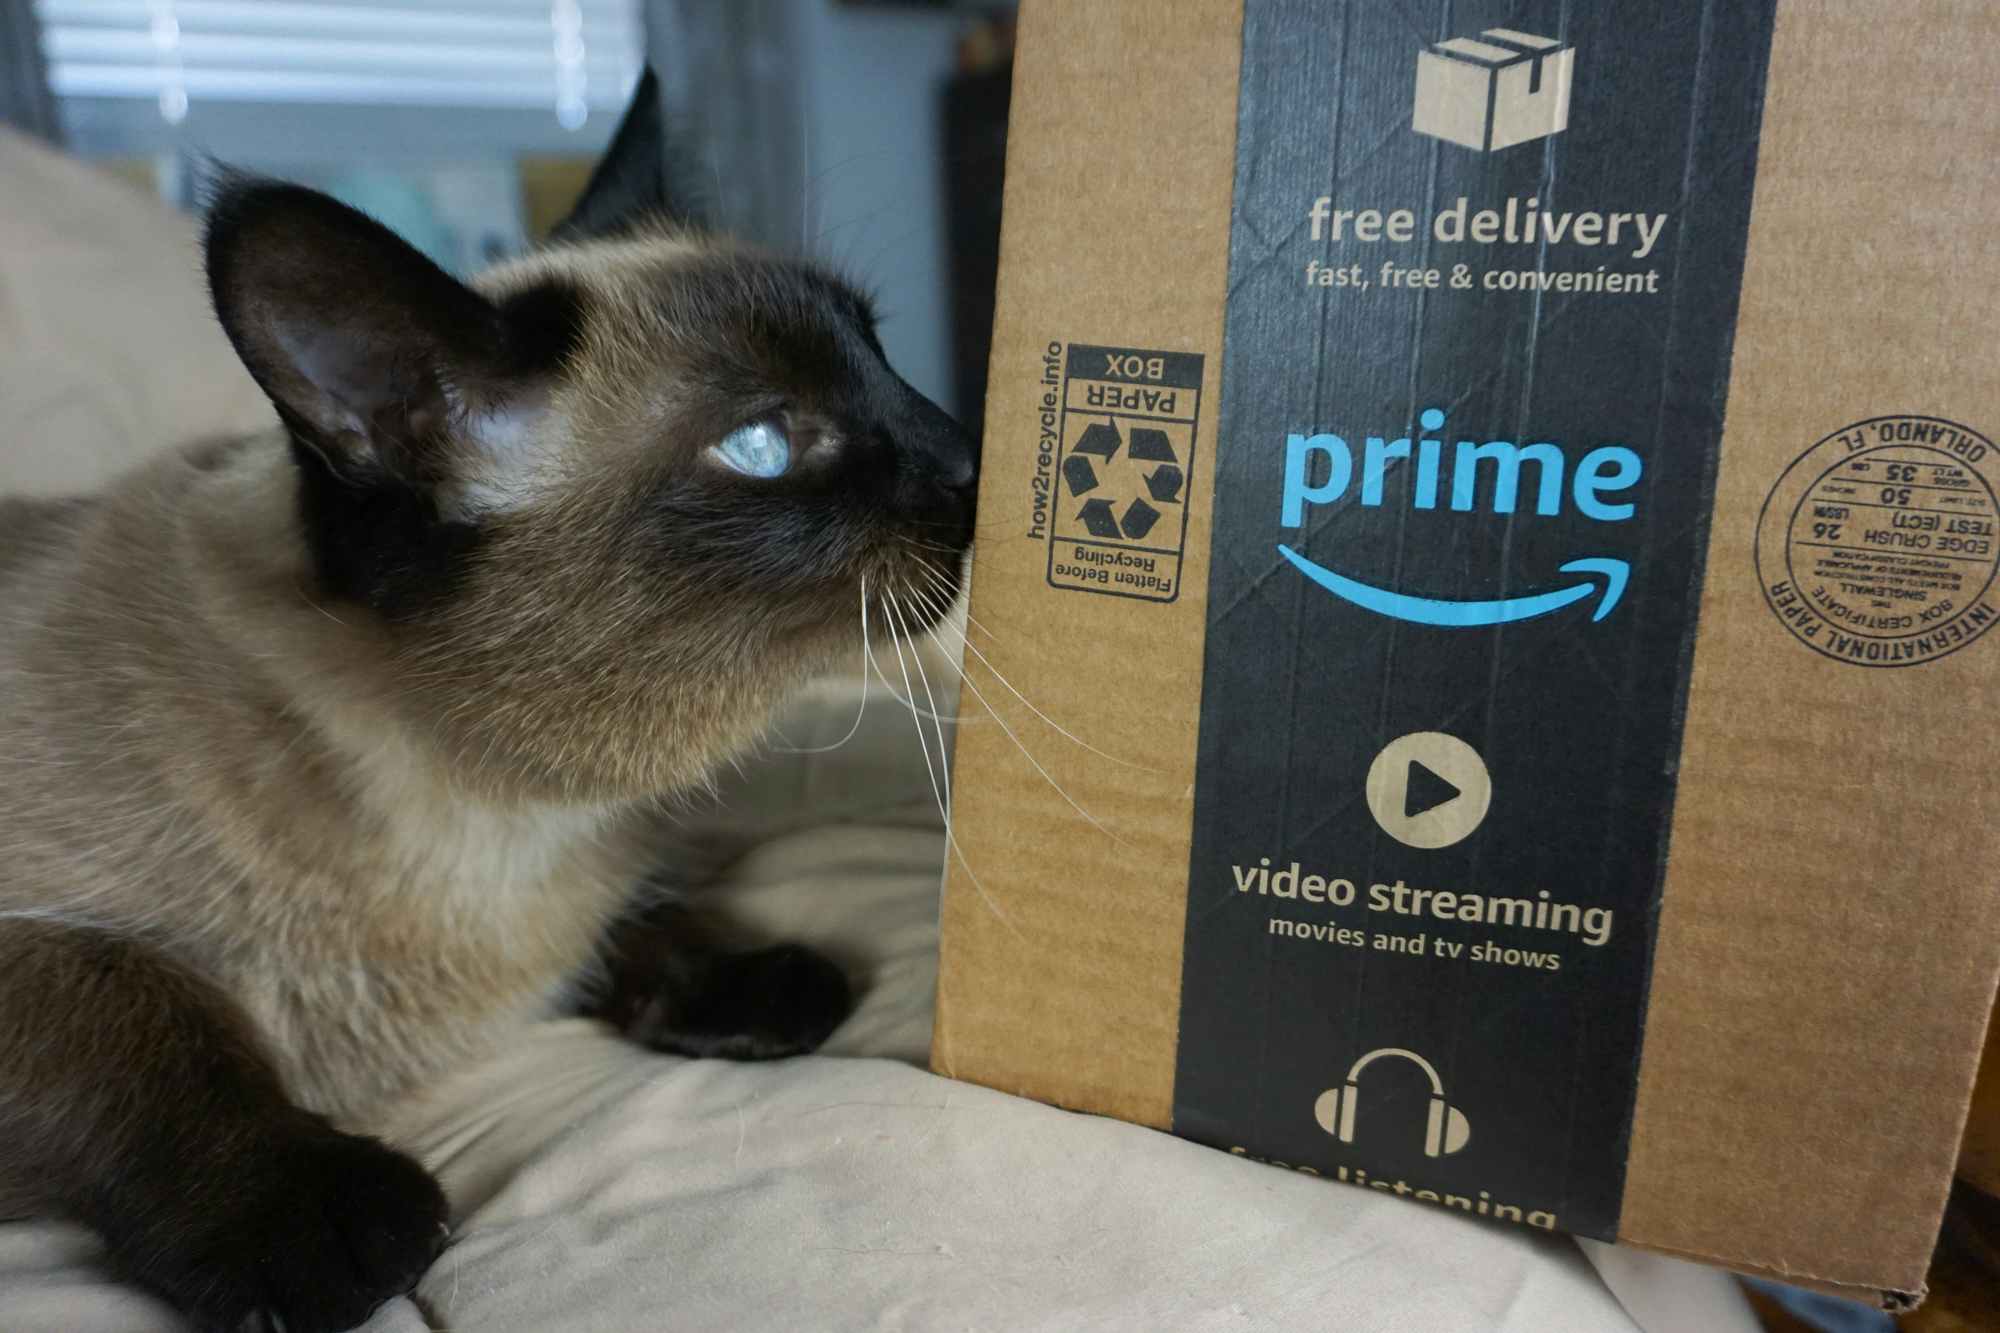 A cat with bright blue eyes sniffing an Amazon Prime box